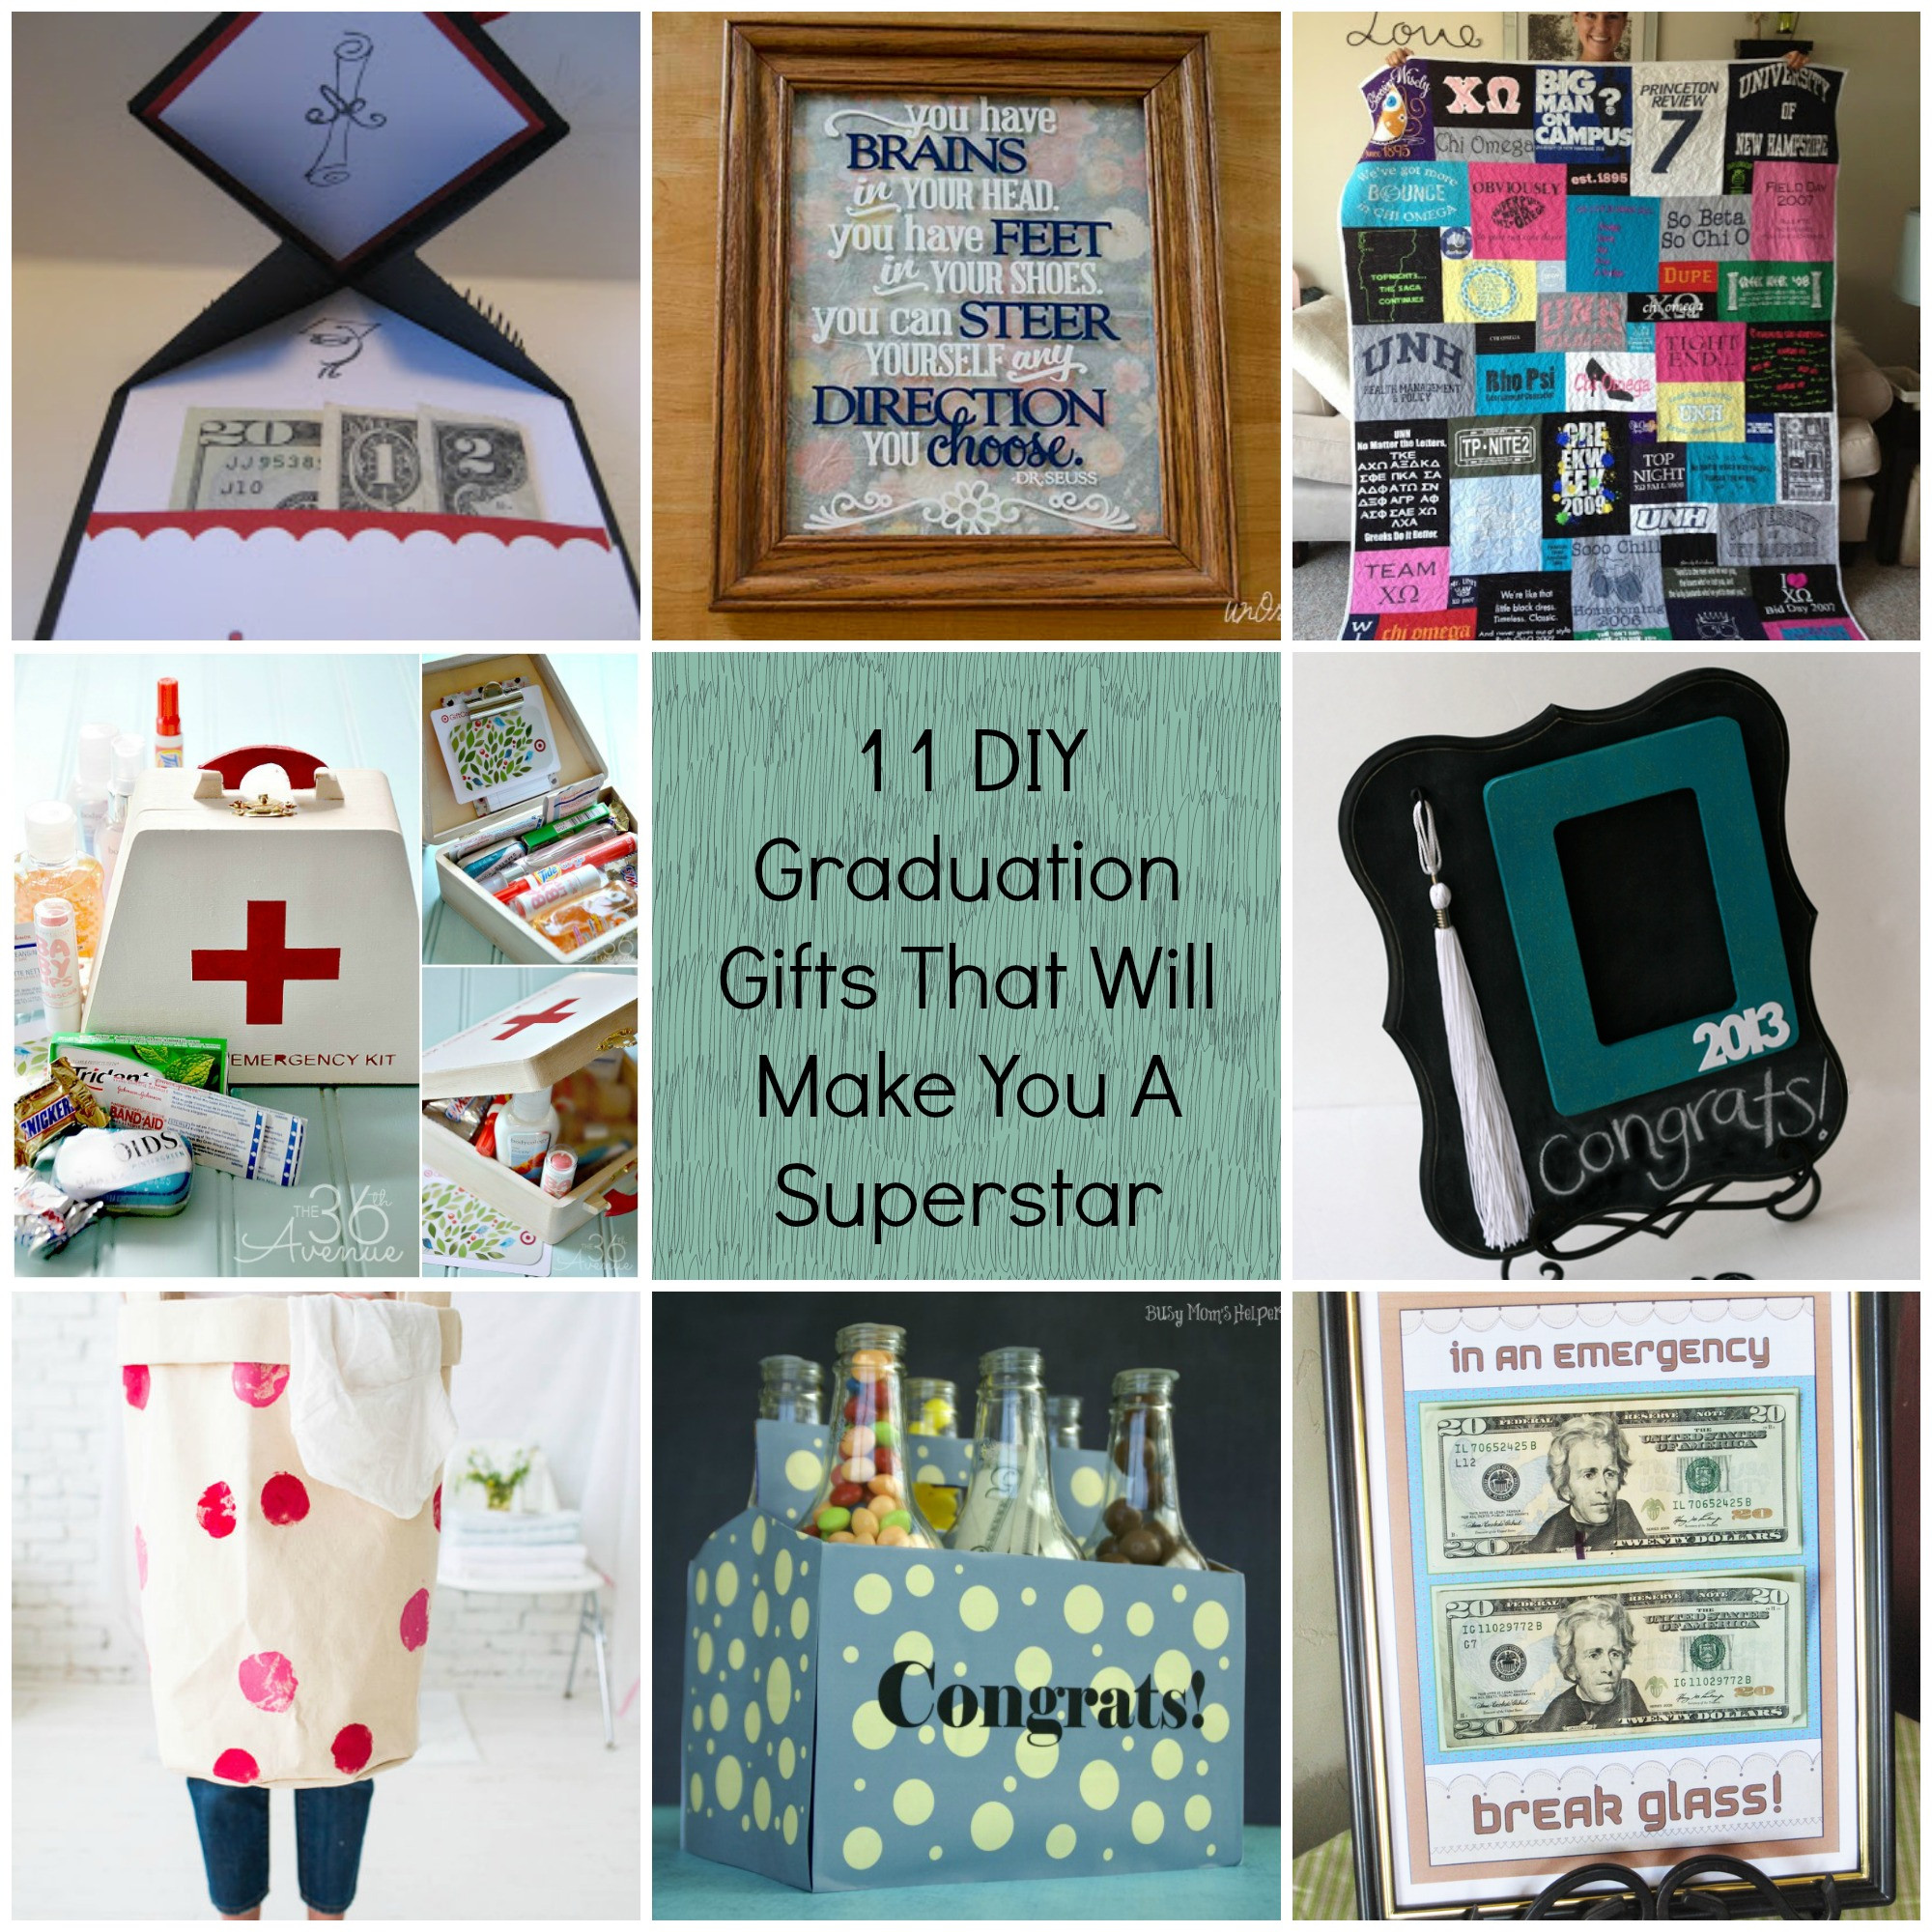 Make Graduation Gift Ideas For Friends
 11 DIY Graduation Gifts That Will Make You A Superstar